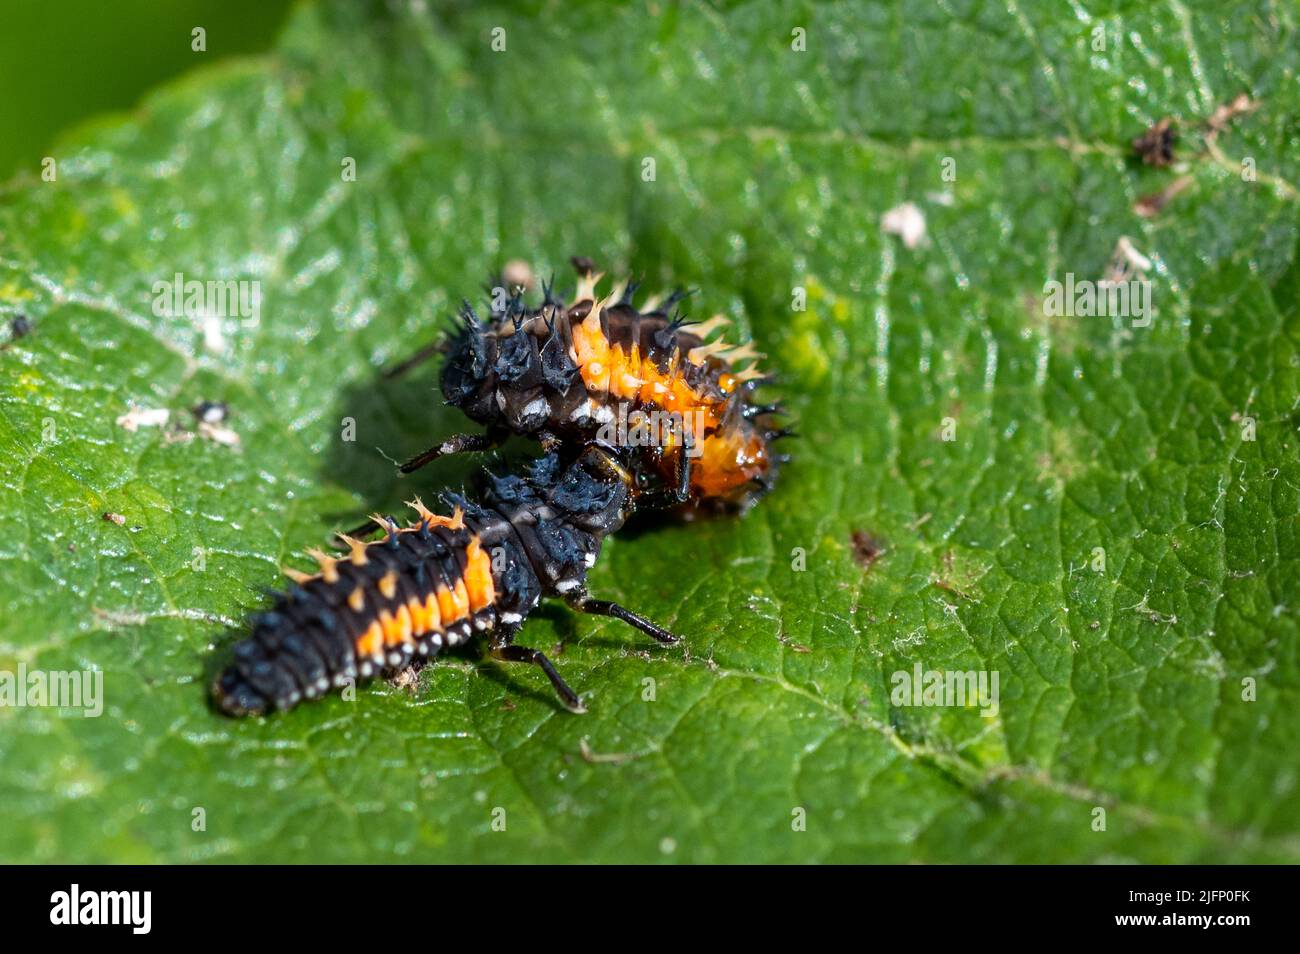 Larva of a Harlequin ladybug beetle, Harmonia axyridis, eating a larva about to change to pupa stage of the same species Stock Photo